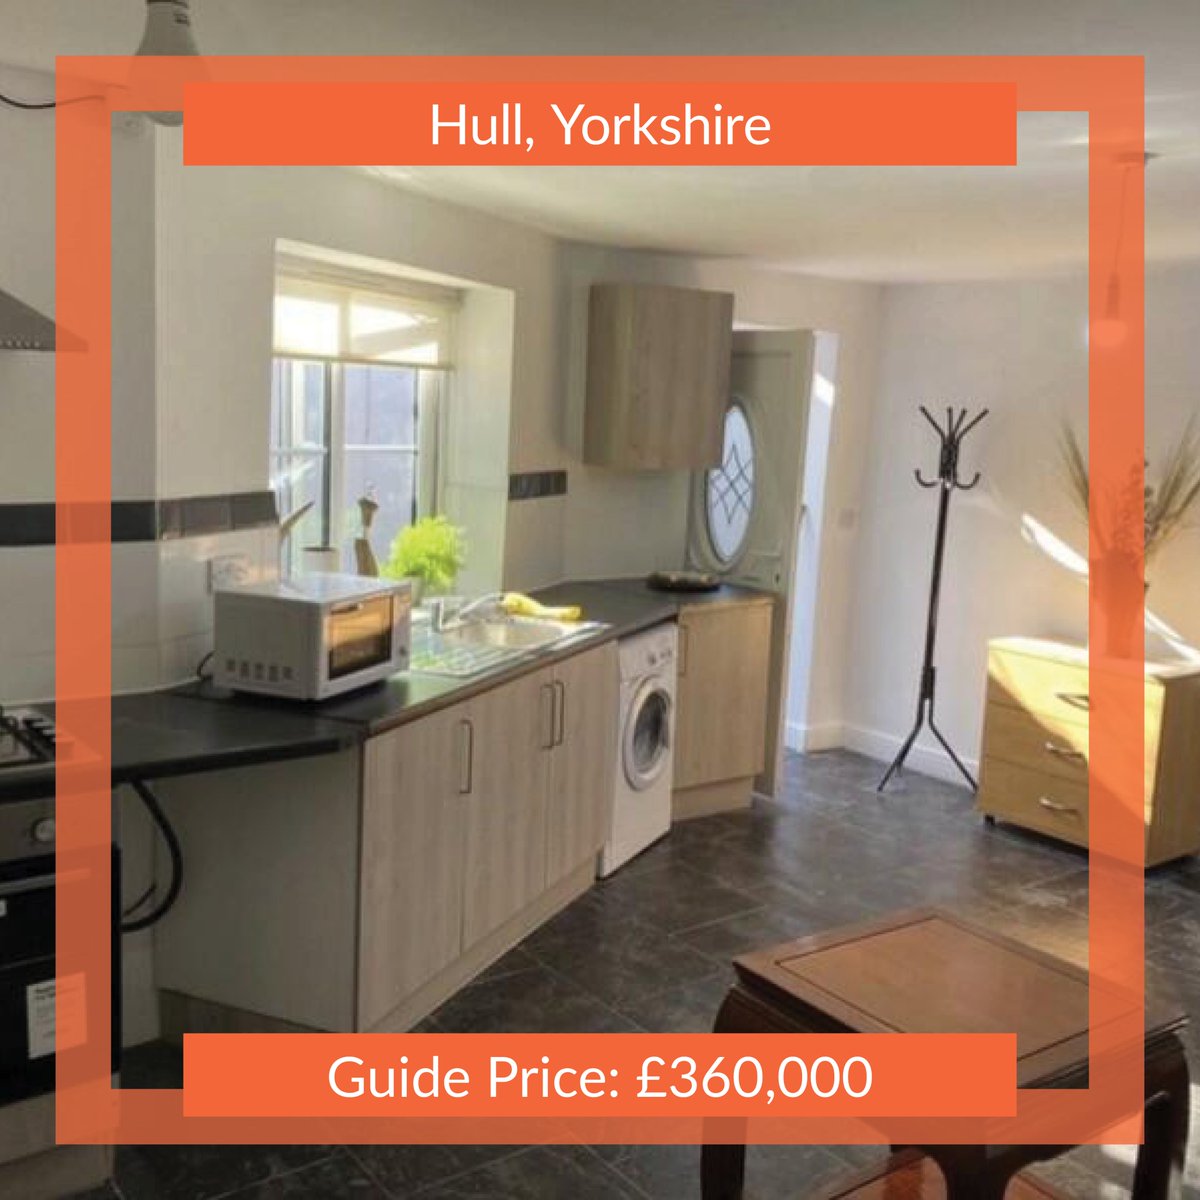 NEW LISTING #Hull #Yorkshire
Guide: £360,000
Auction: 02/08/23
Website: whoobid.co.uk/accueil/auctio…

#whoobid #propertyauction #houseauction #auction #property #buytolet #propertyinvestor #housingmarket #quicksale #propertydeals #pricegrowth #mortgage #investment #Commercial